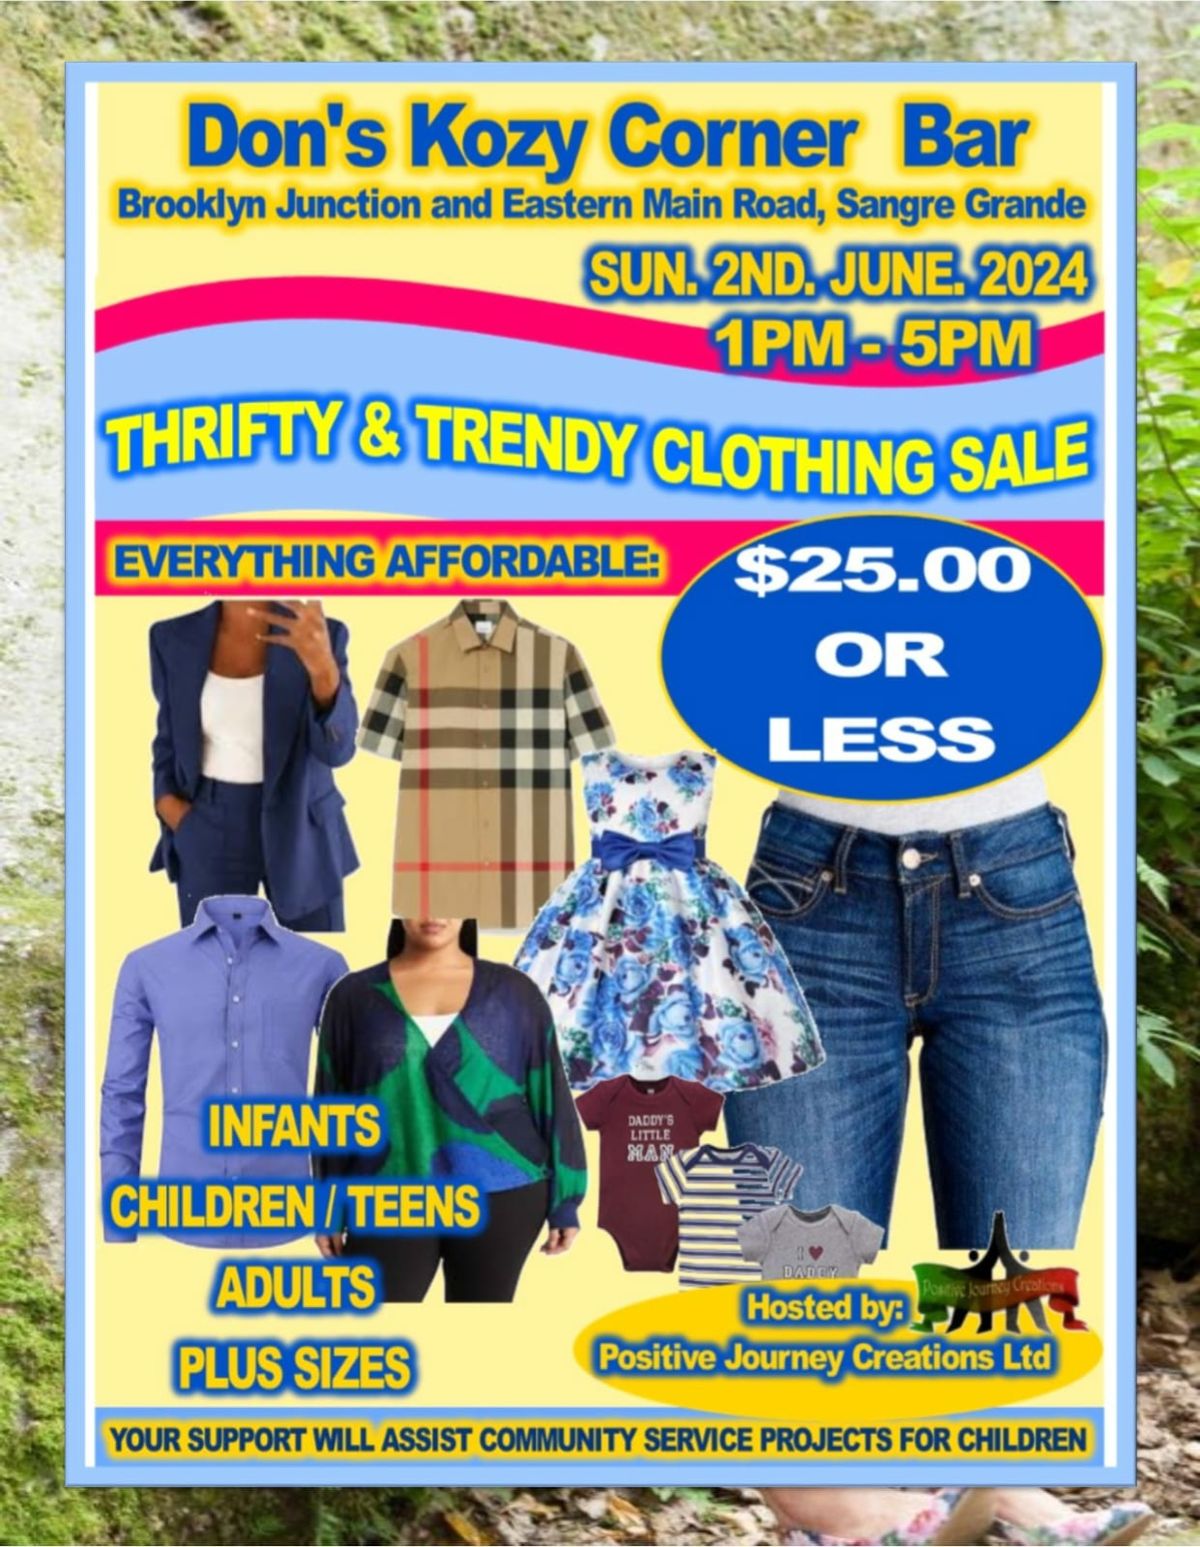 Thrifty & Trendy Clothing Sale